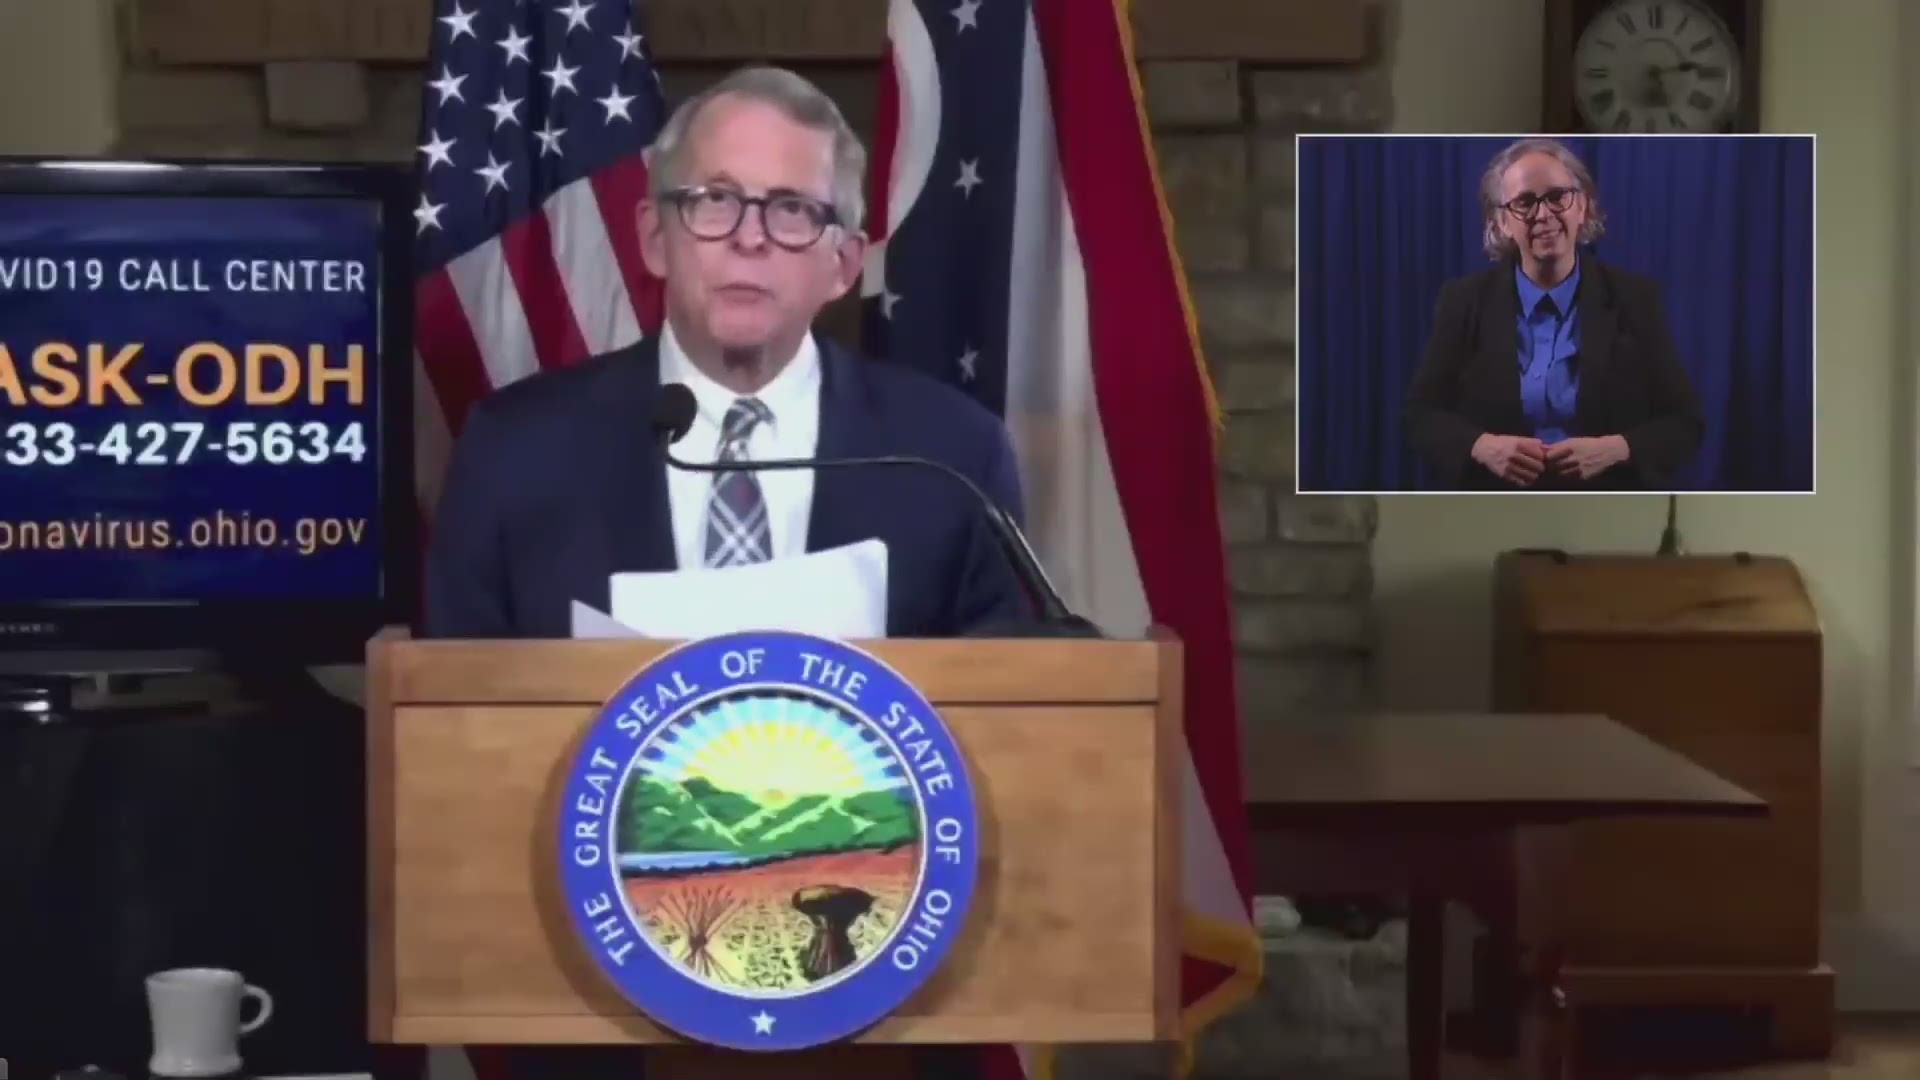 At his press briefing on Tuesday, Ohio Gov. Mike DeWine discussed his proposed overhaul of the state's Medicaid managed care system.